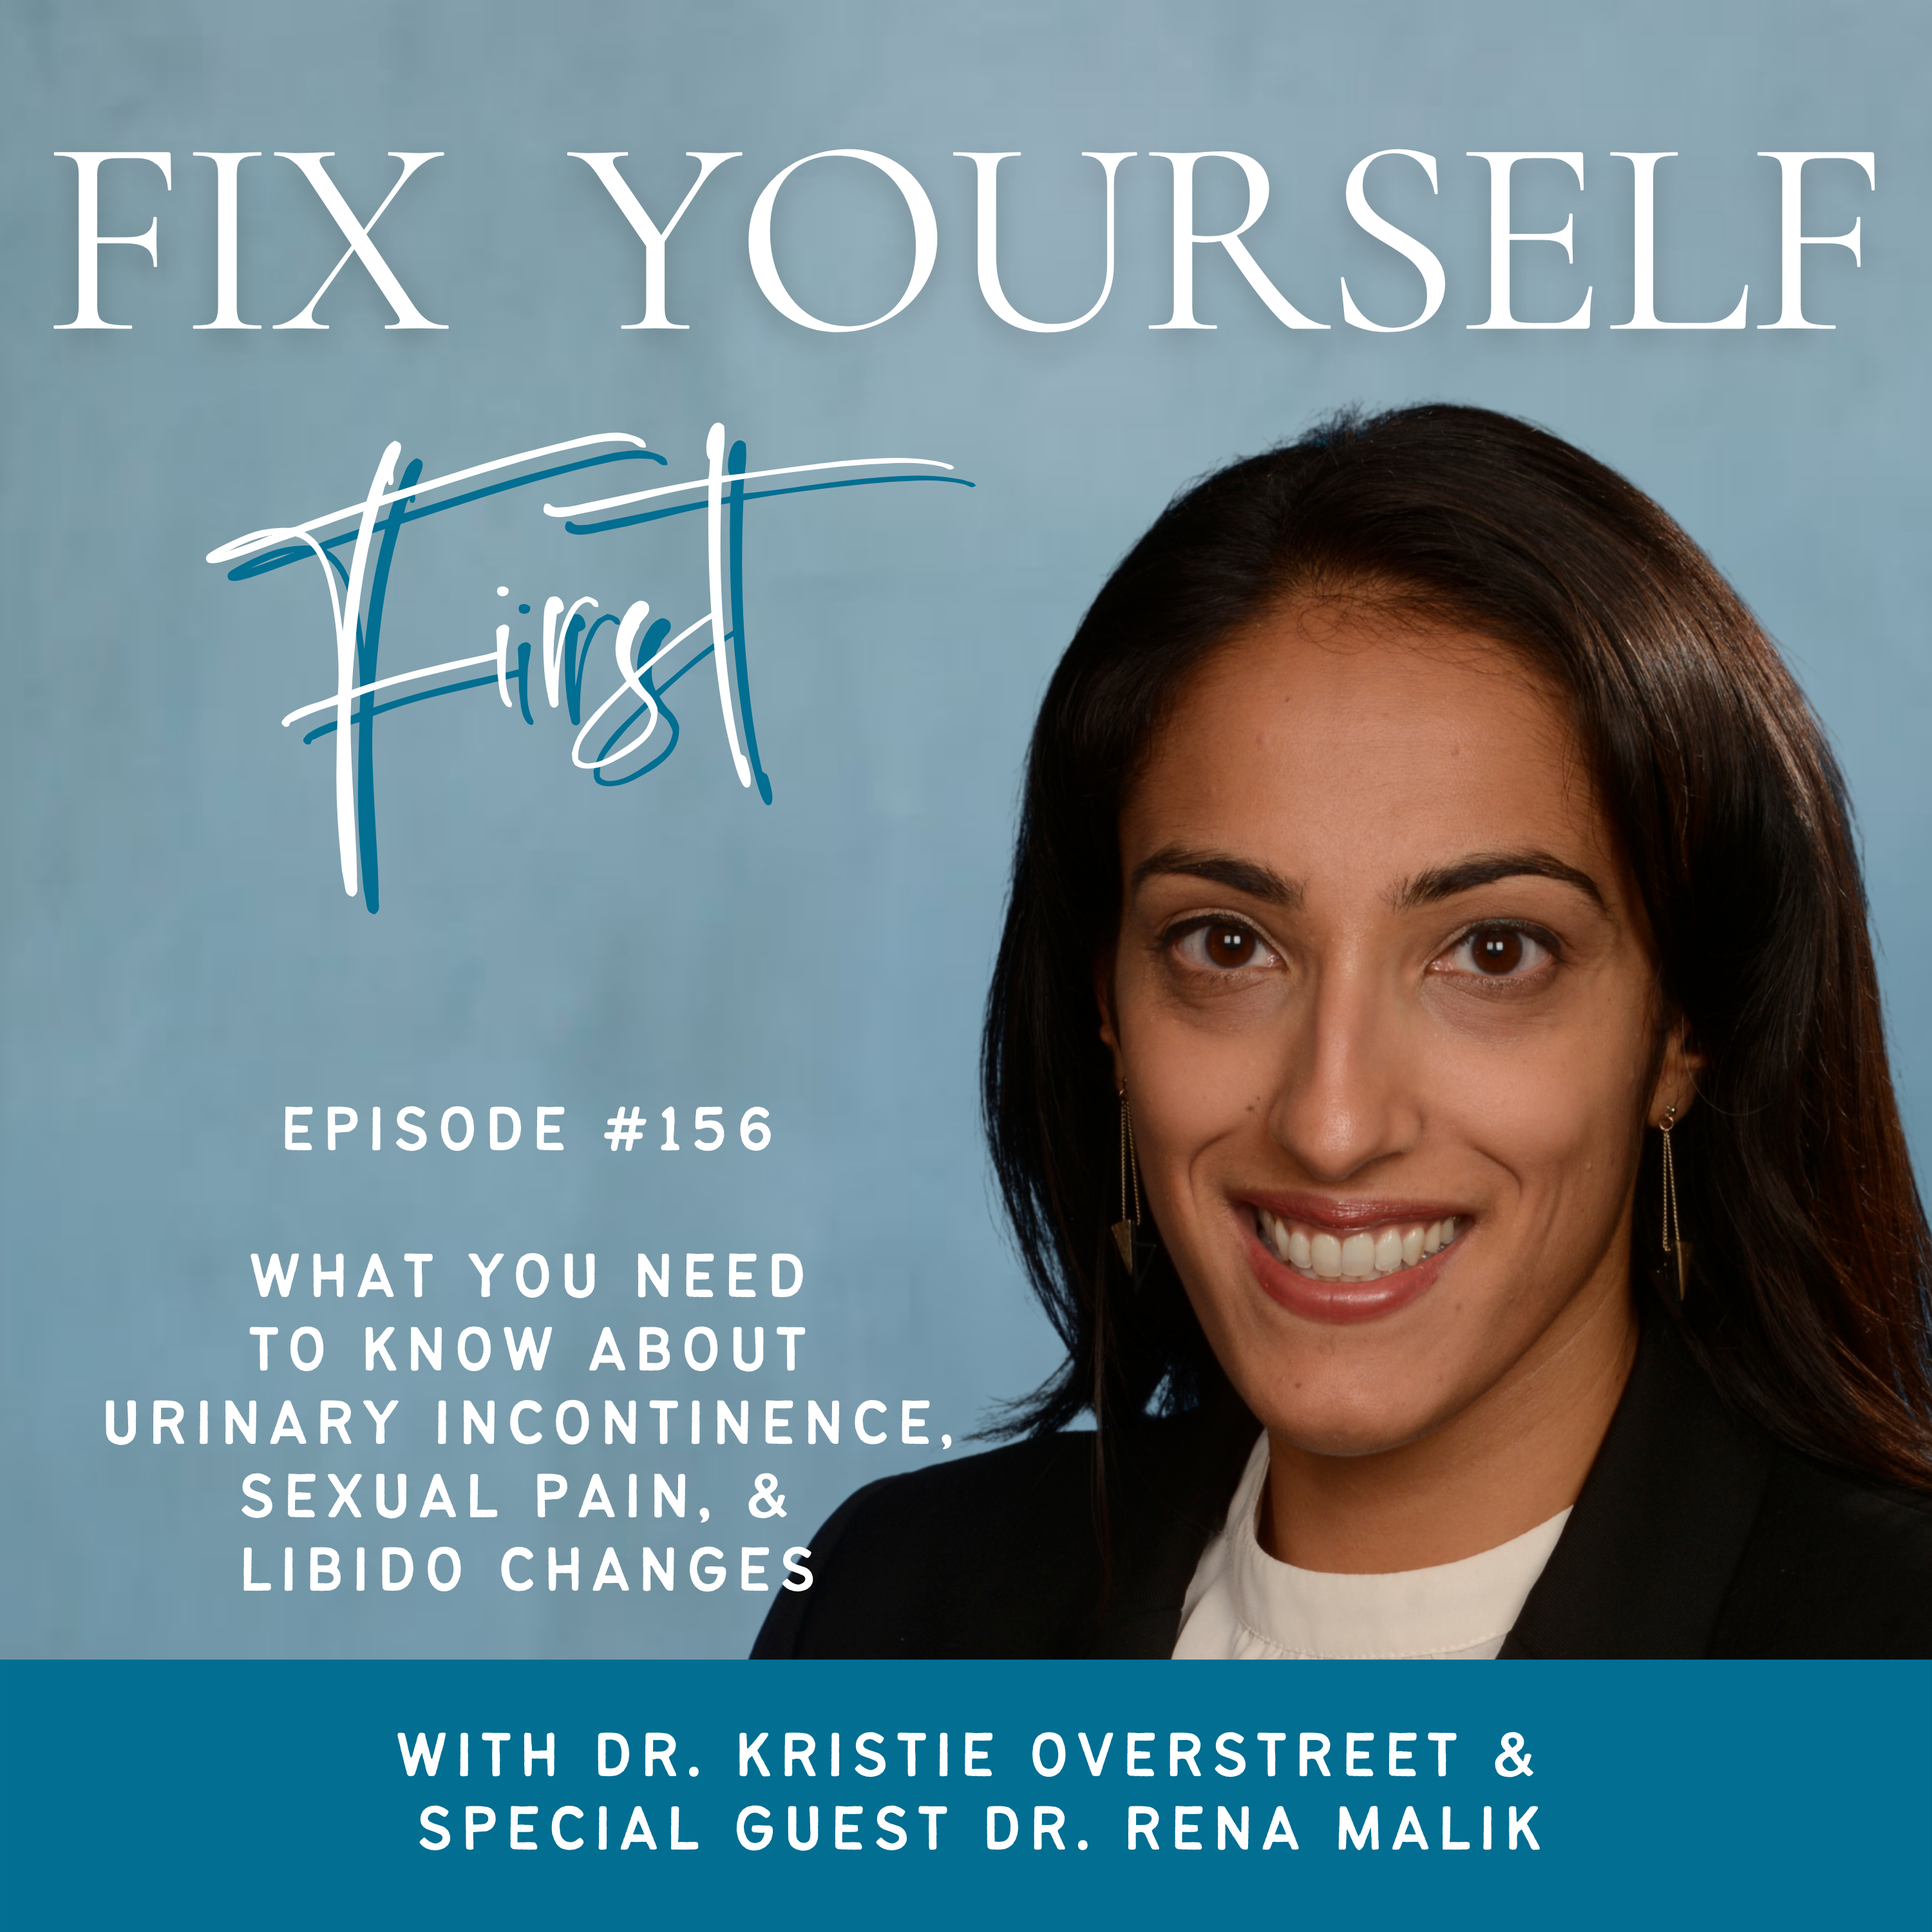 Fix Yourself First Episode 156 What You Need to Know About Urinary Incontinence, Sexual Pain, & Libido Changes with Dr. Rena Malik